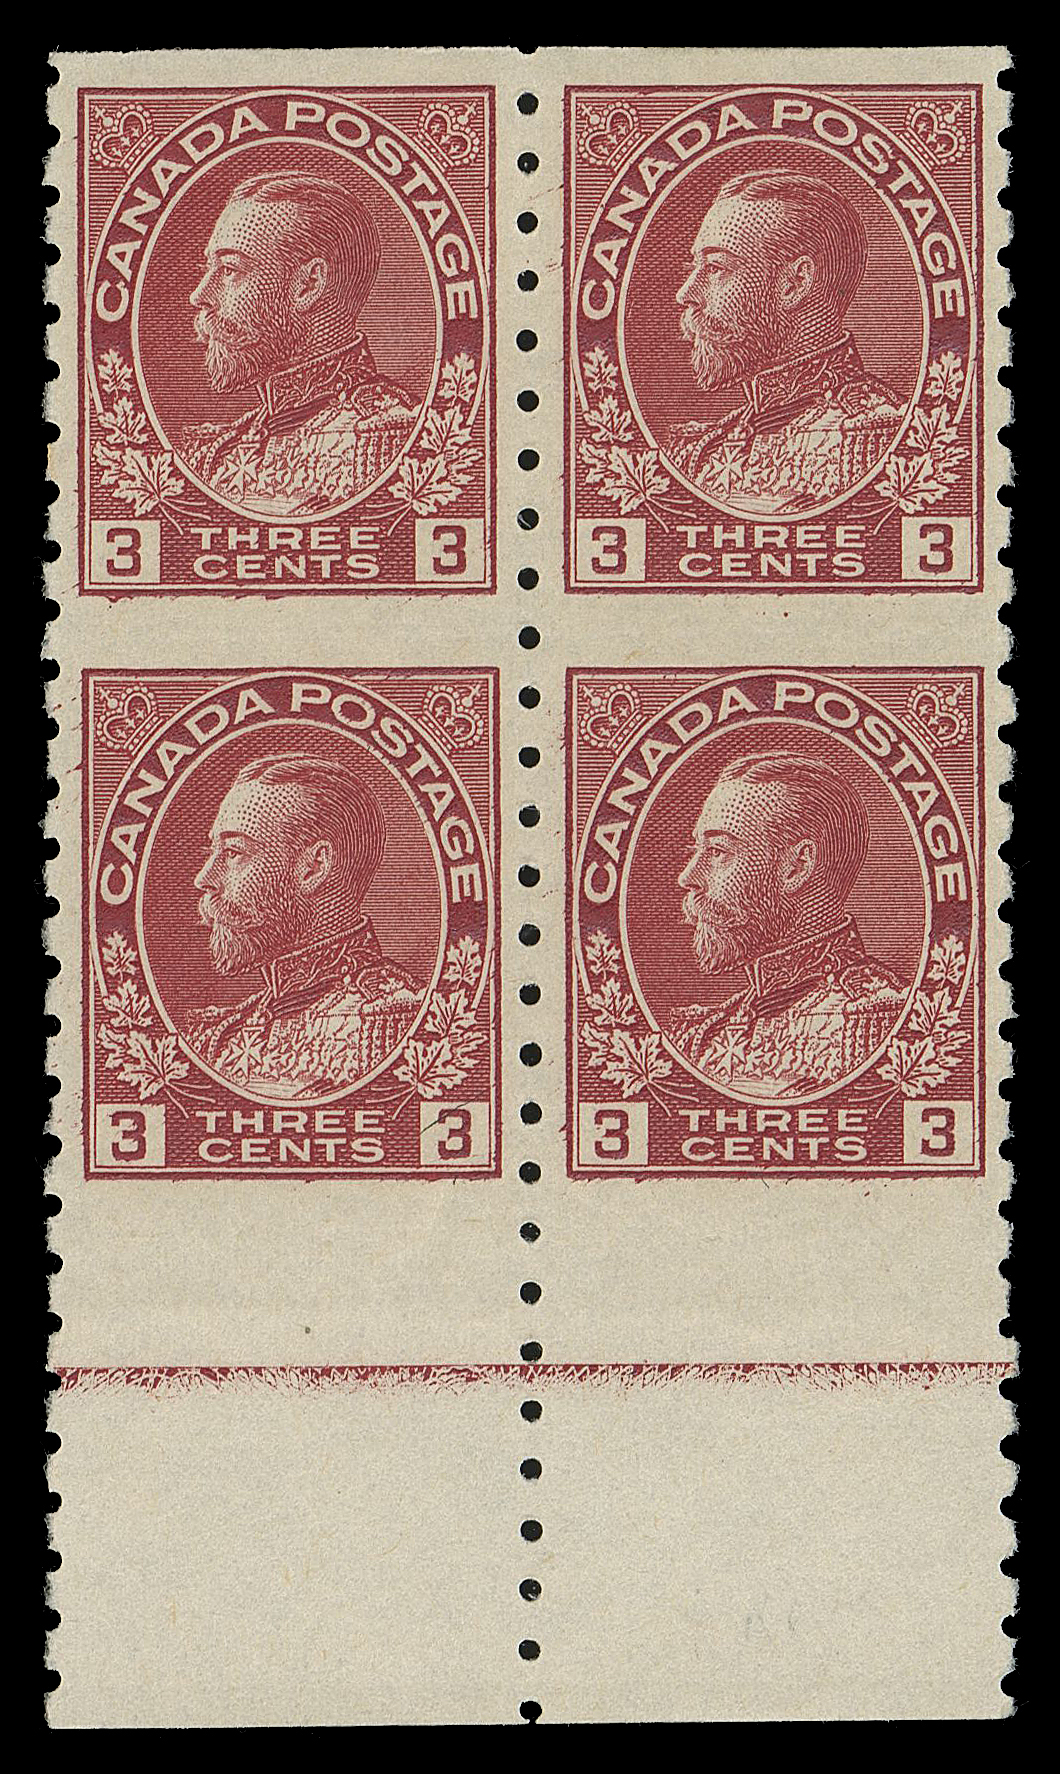 ADMIRAL STAMPS  130a,Post office fresh block, imperforate horizontally, with superior centering and intact perforations, characteristic deep colour, showing usual strength Type D lathework. Much nicer than normally encountered, XF LH